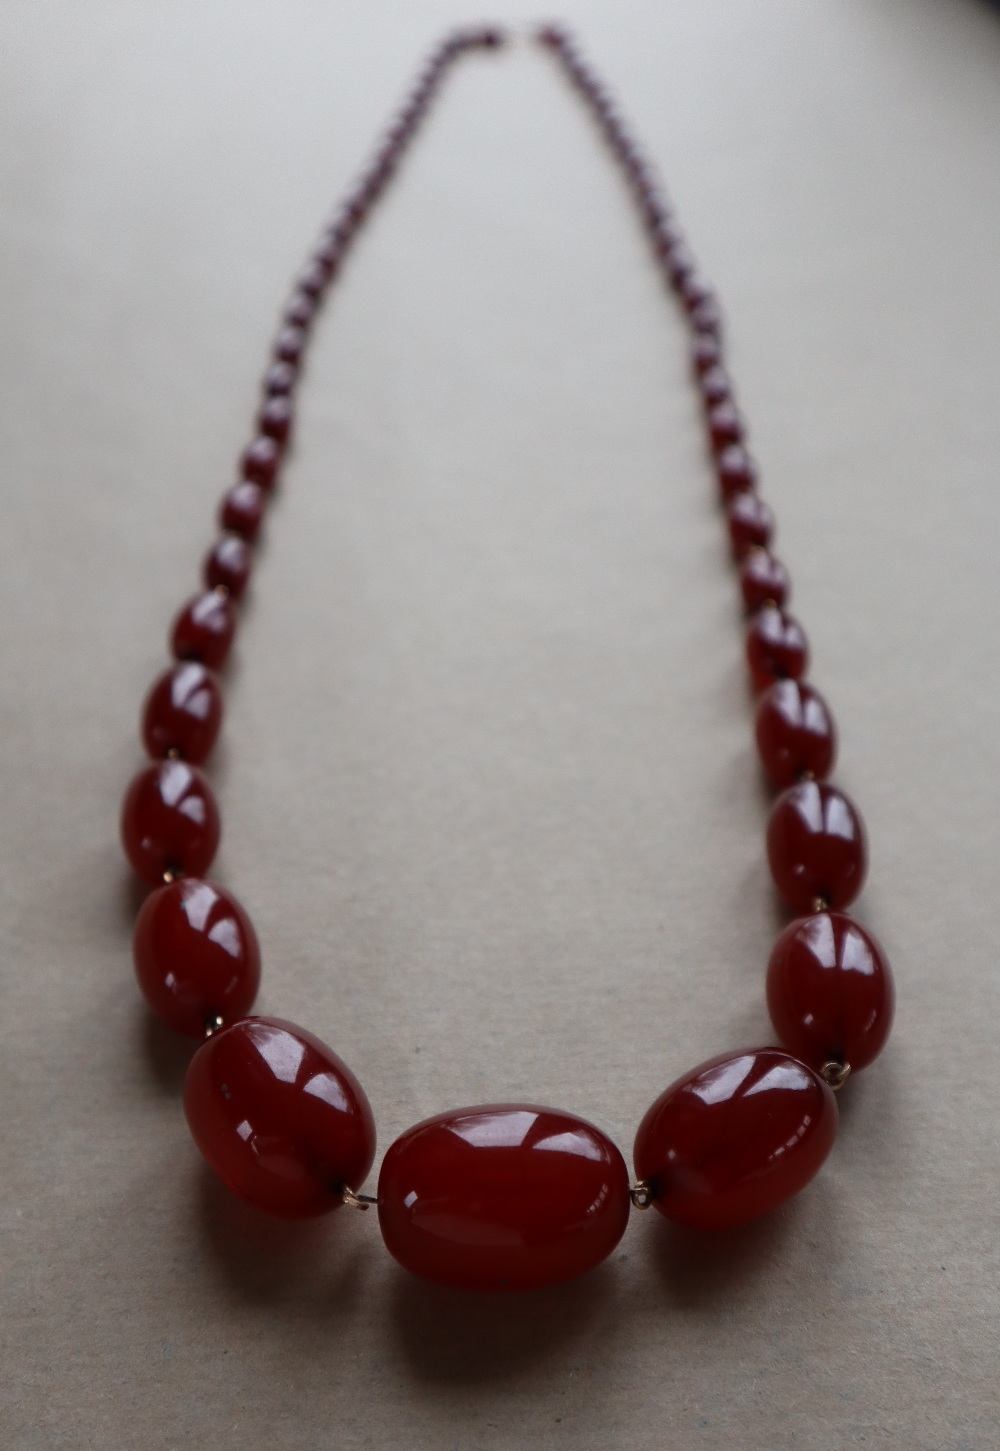 A string of cherry amber / bakelite beads, - Image 2 of 12